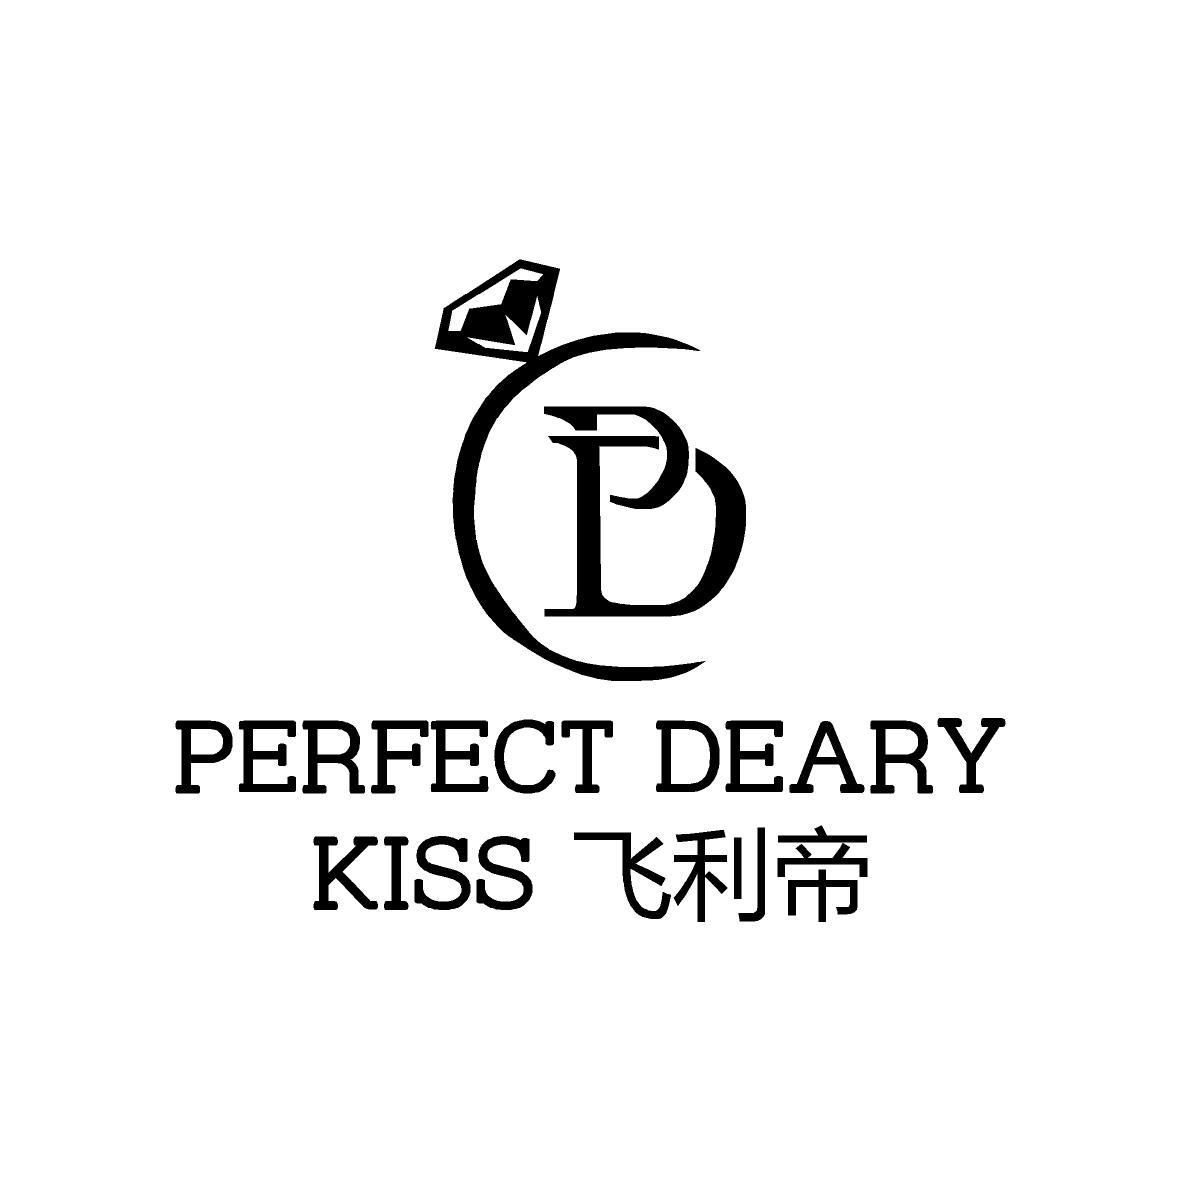  PERFECT  DEARY KISS